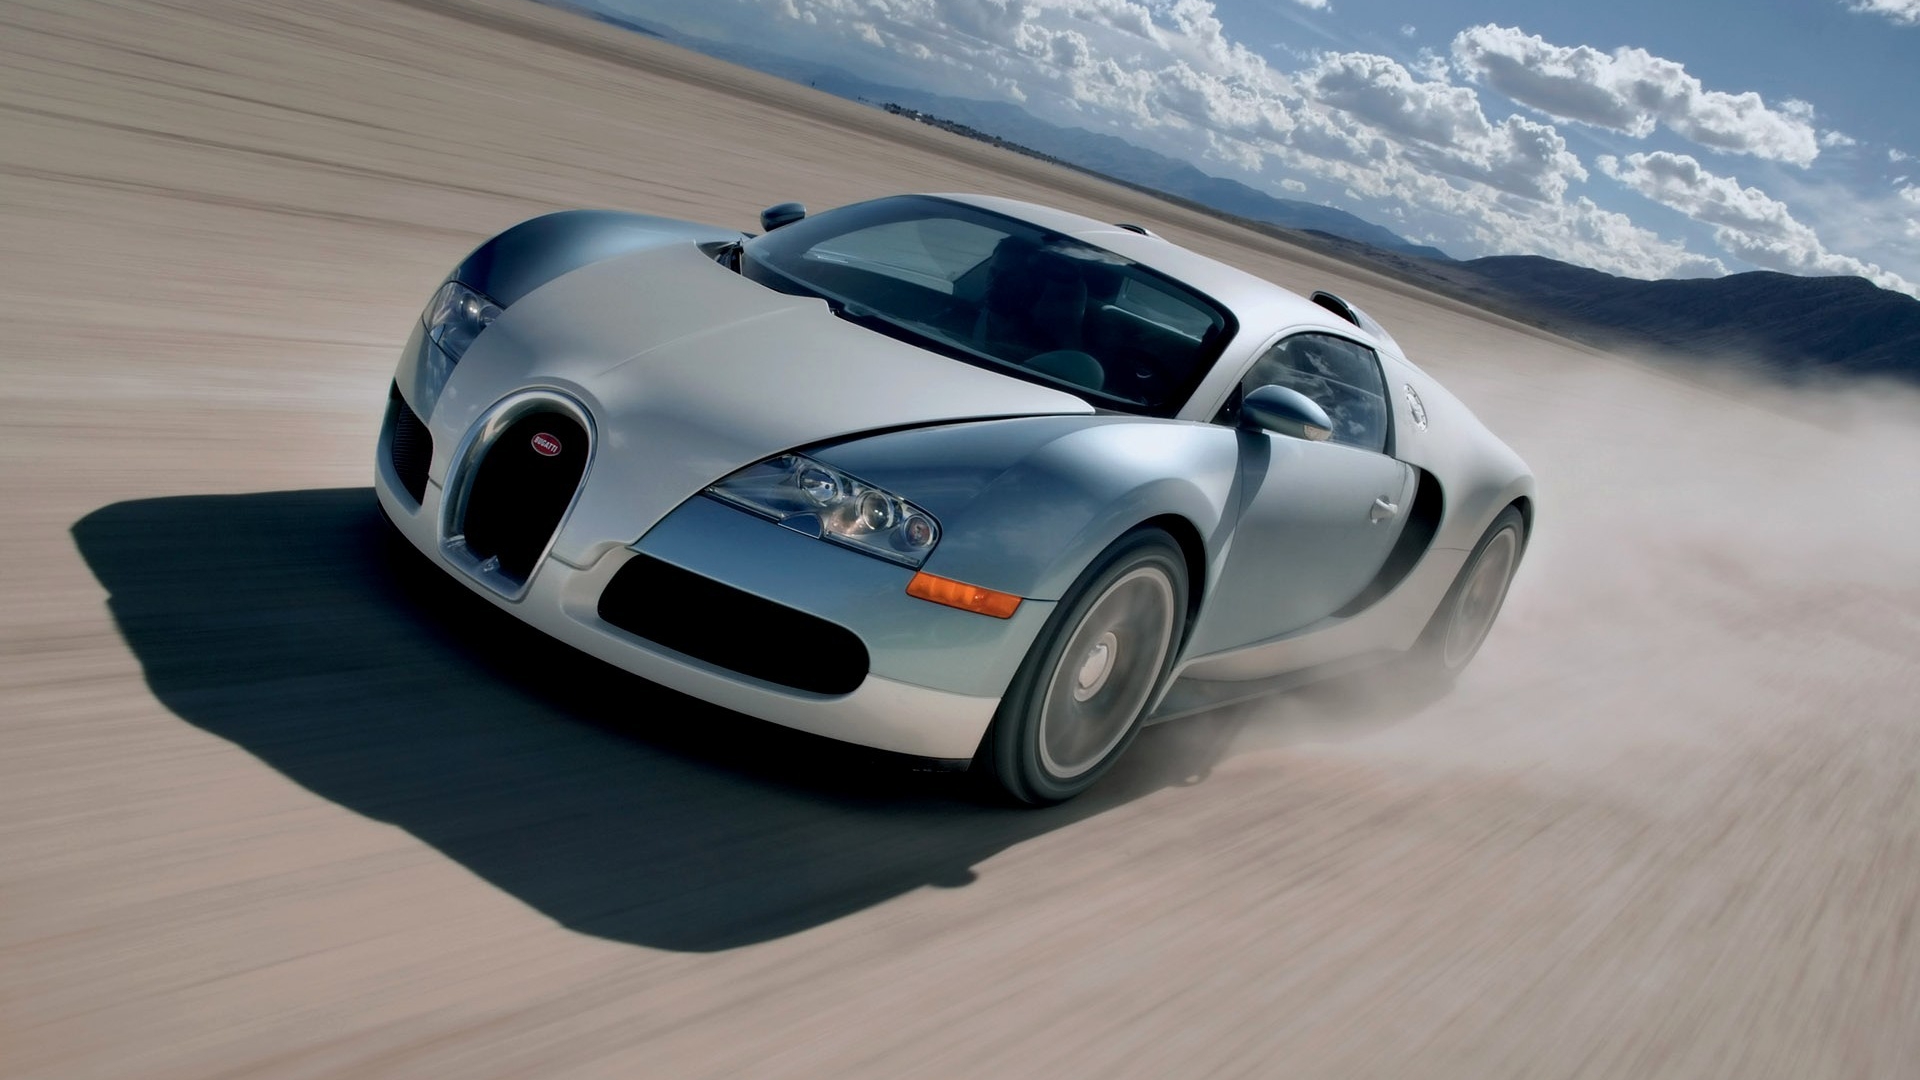 Bugatti Veyron 3D live wallpaper for Android. Bugatti Veyron 3D free  download for tablet and phone.